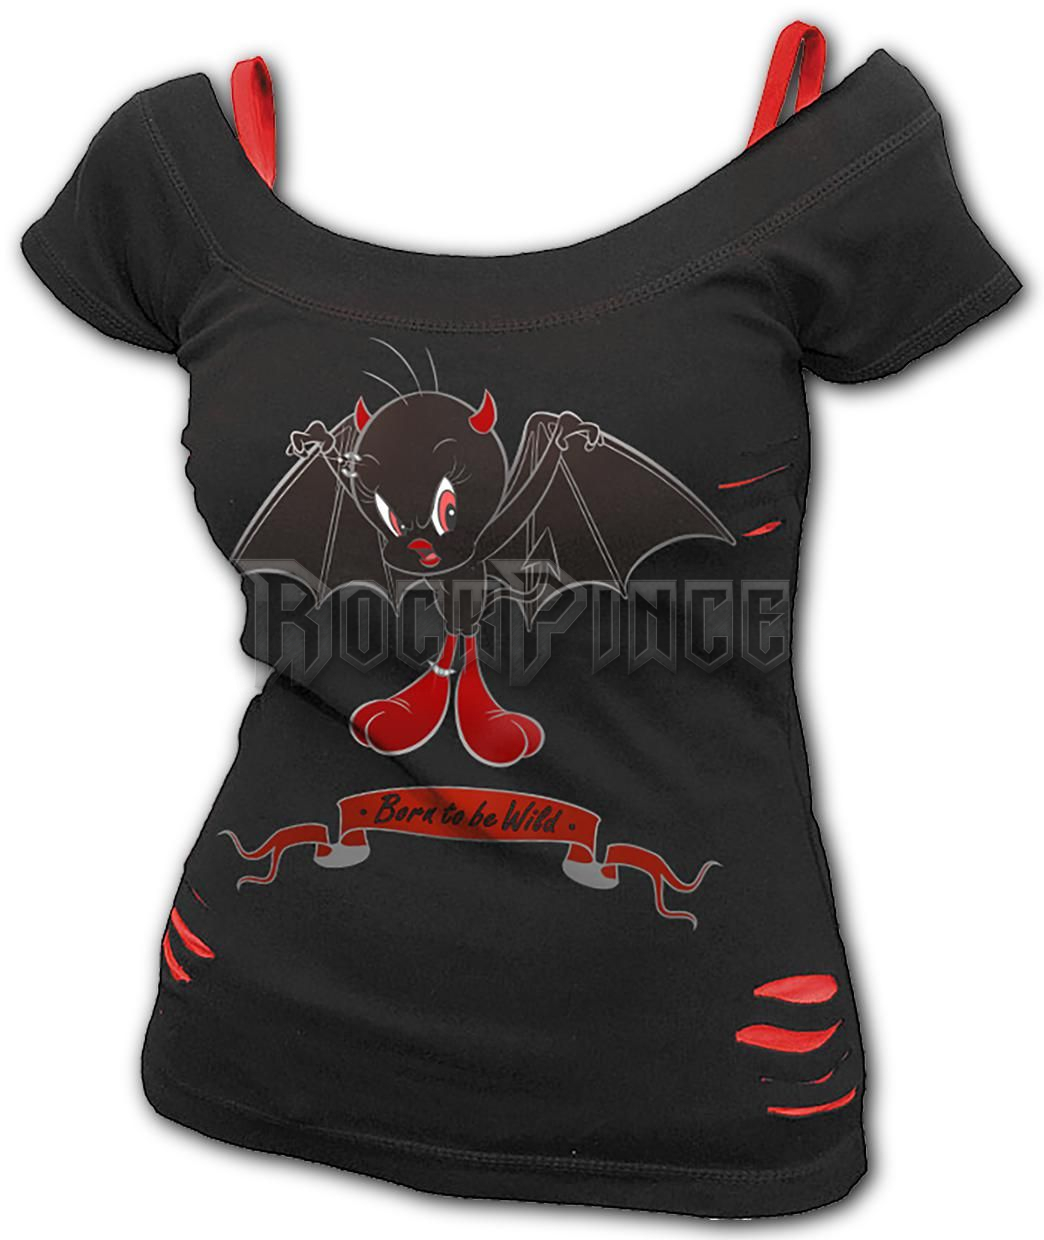 TWEETY - BORN TO BE WILD - 2in1 Red Ripped Top Black - G505F711